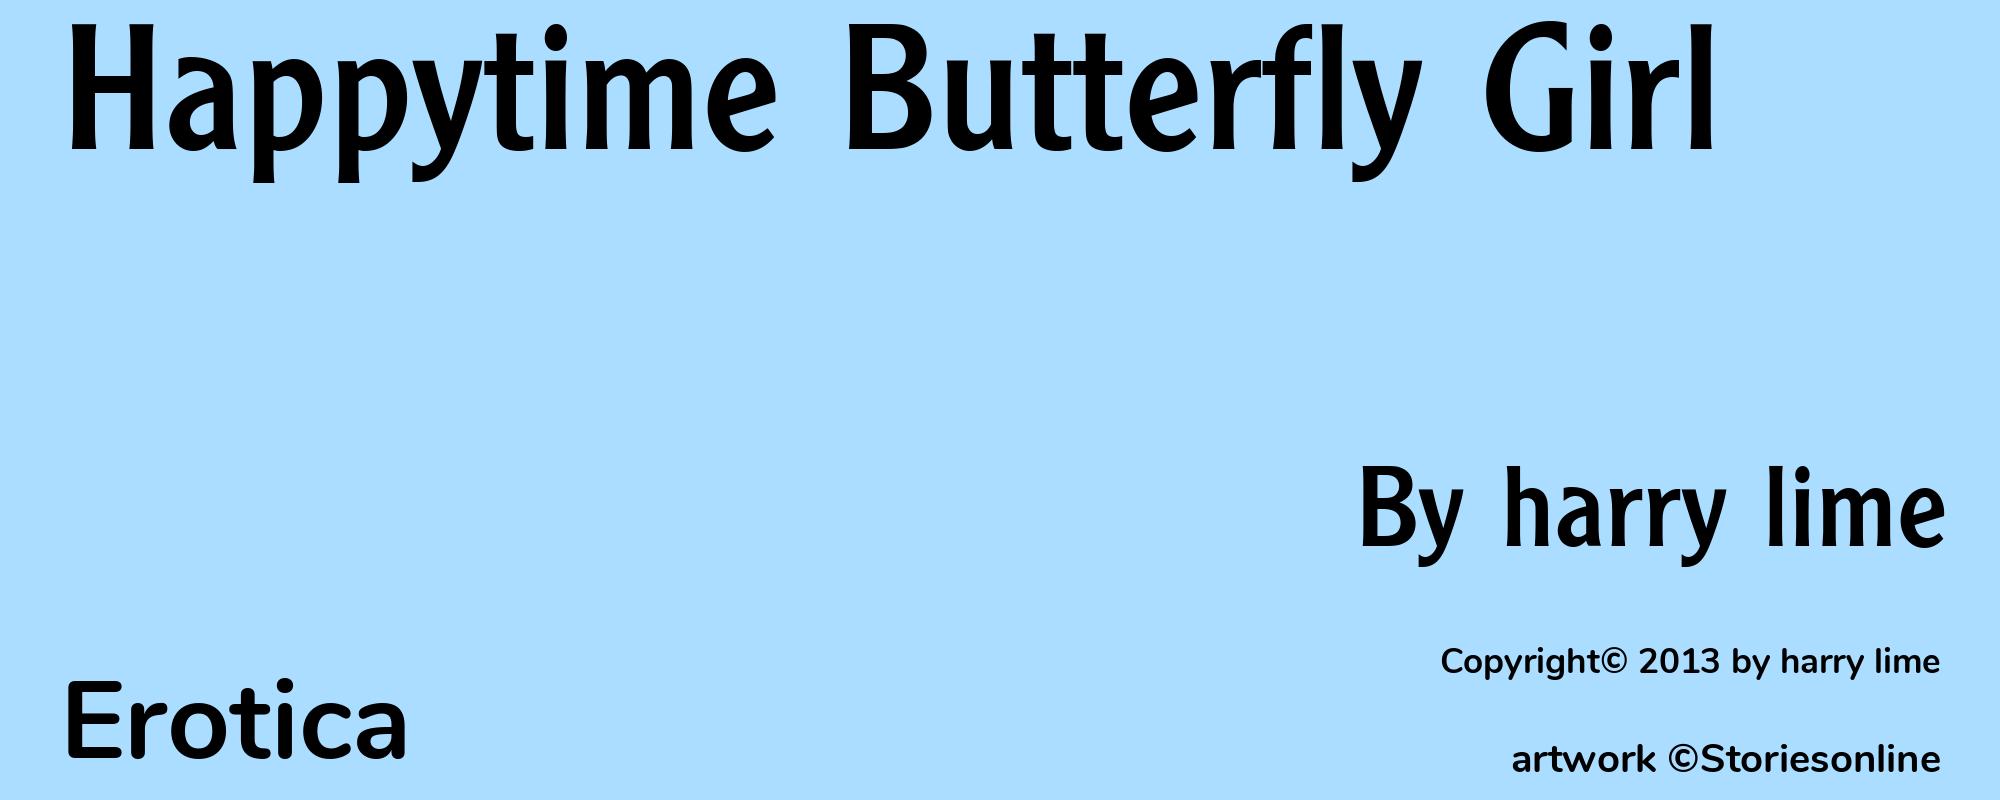 Happytime Butterfly Girl - Cover